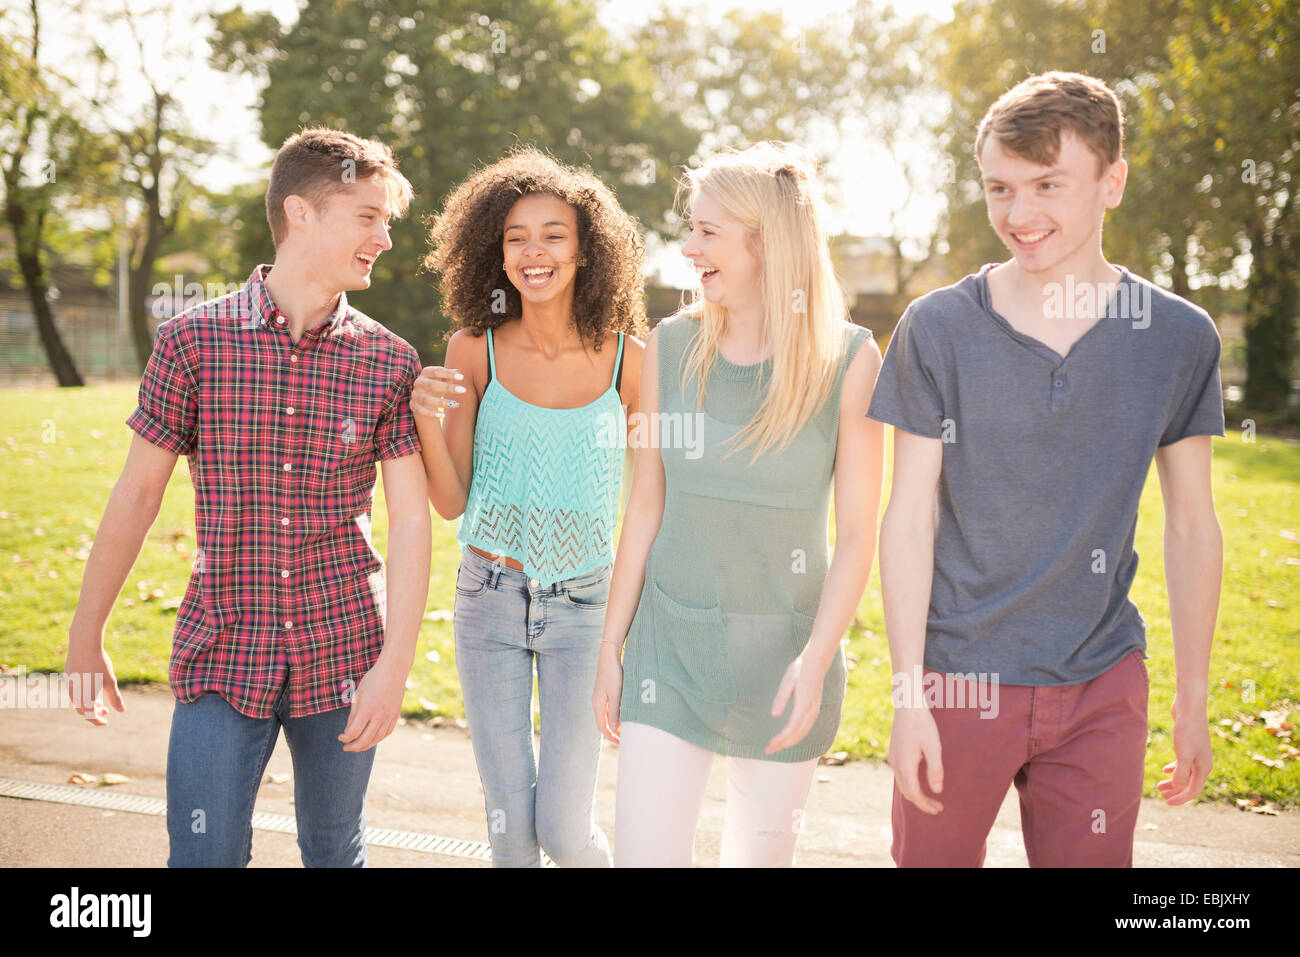 Four young adult friends strolling in park Stock Photo